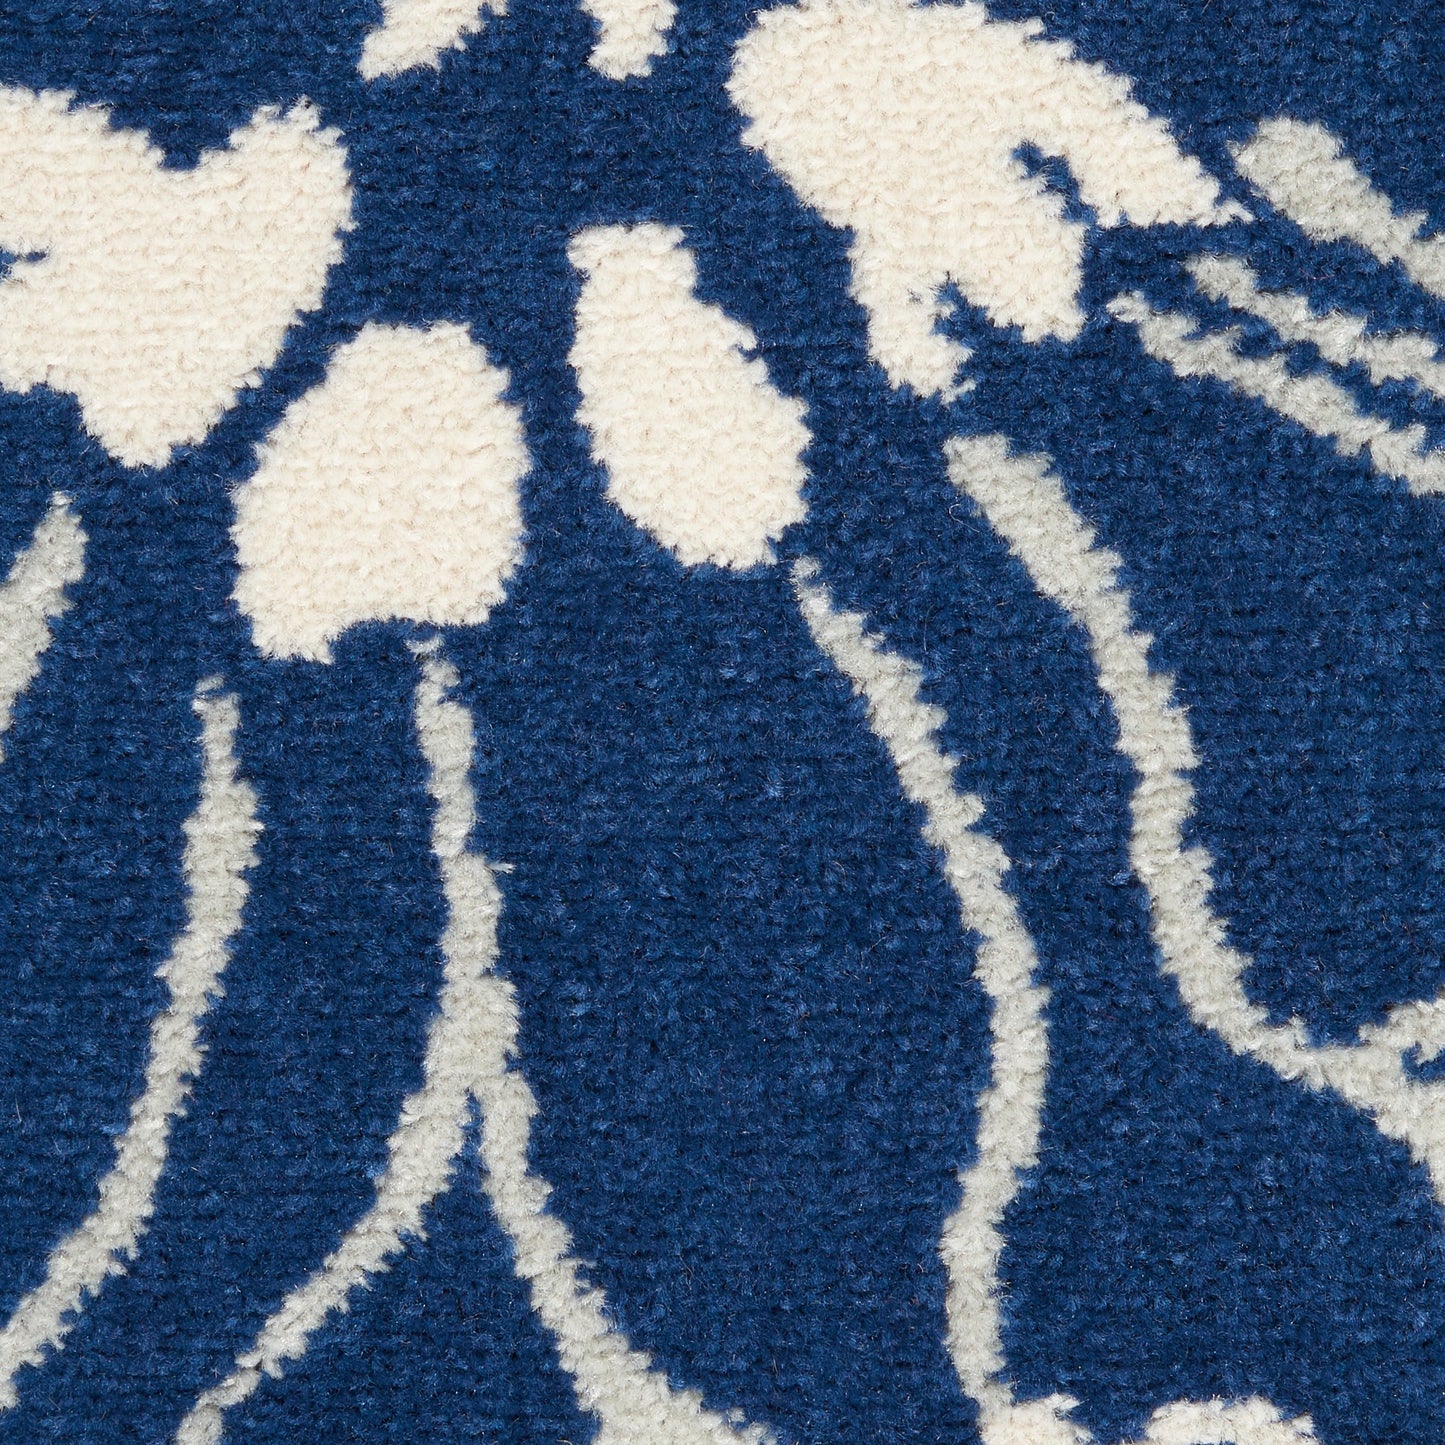 4' Blue And Ivory Round Floral Dhurrie Area Rug